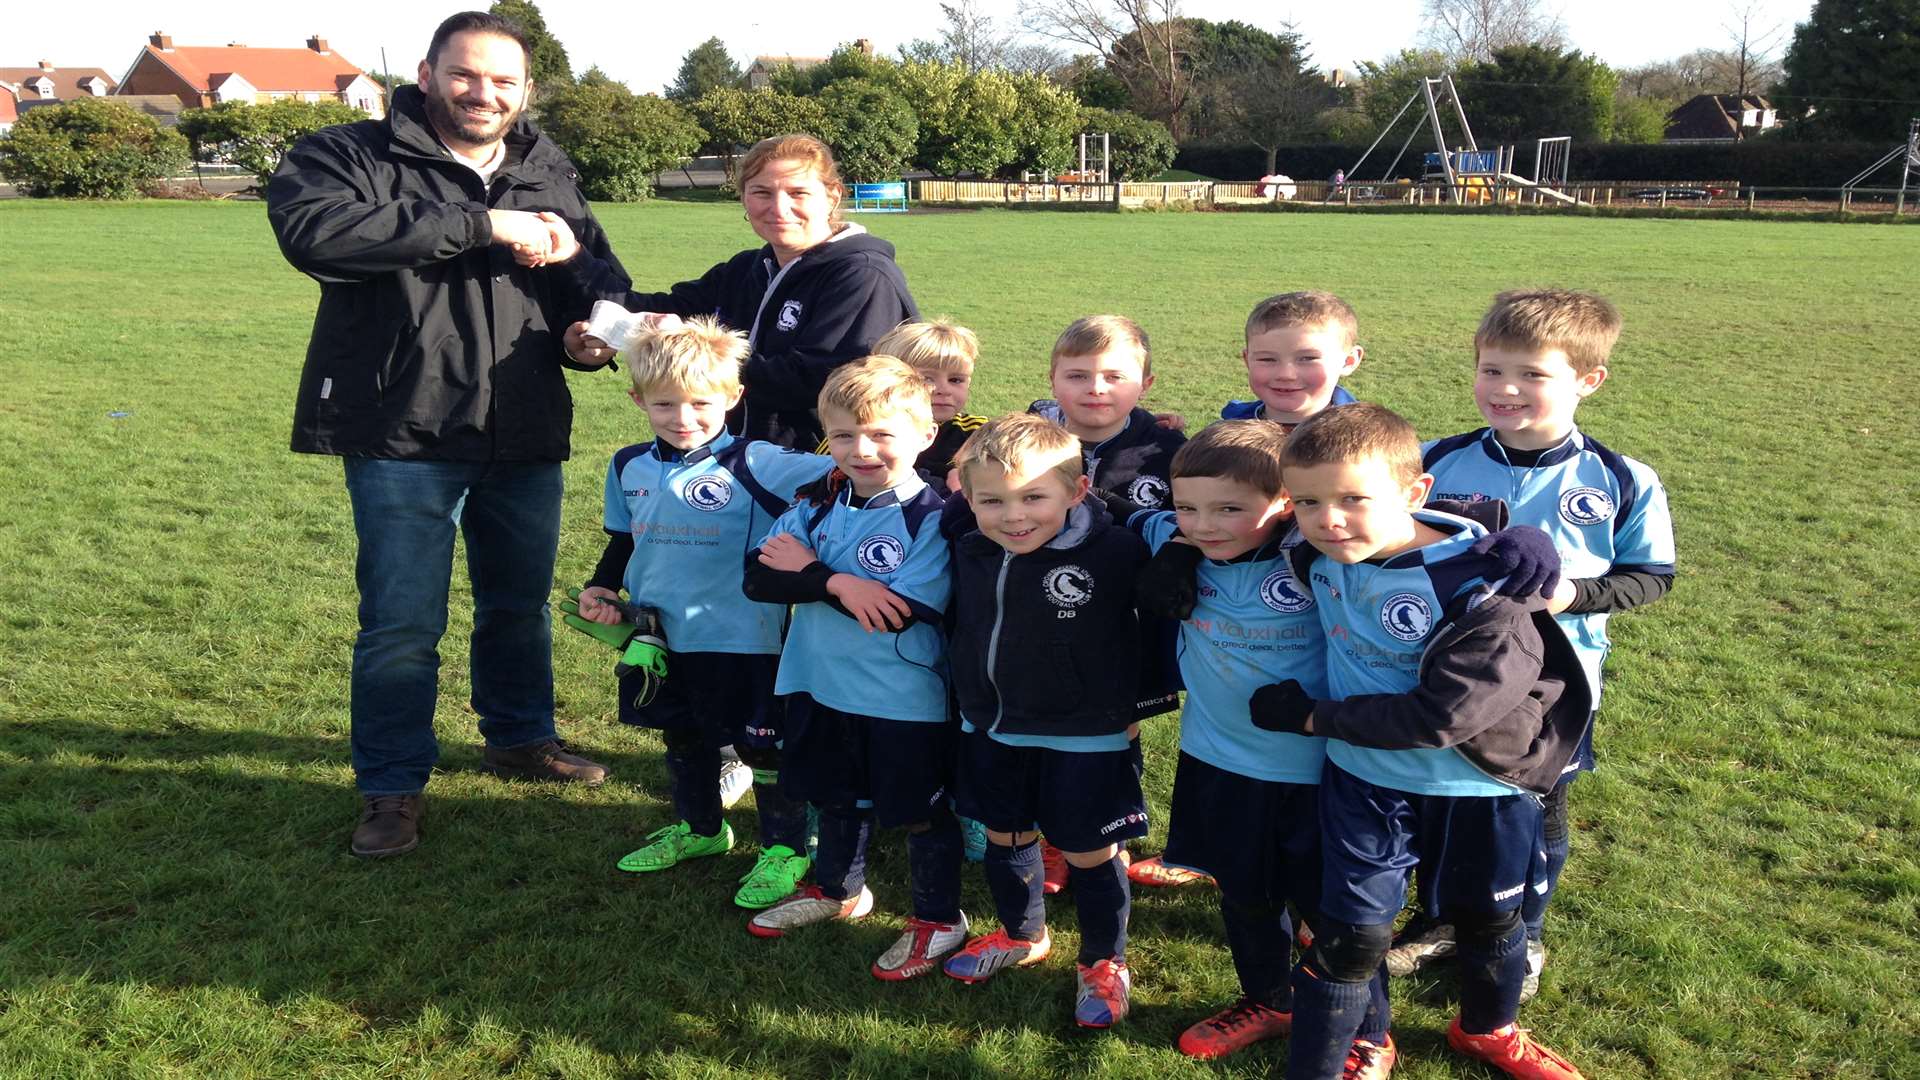 Jonathan Tatlock, from SLM Vauxhall in Tunbridge Wells, with Crowborough Athletic Youth under-7s and manager Sharon Hammond